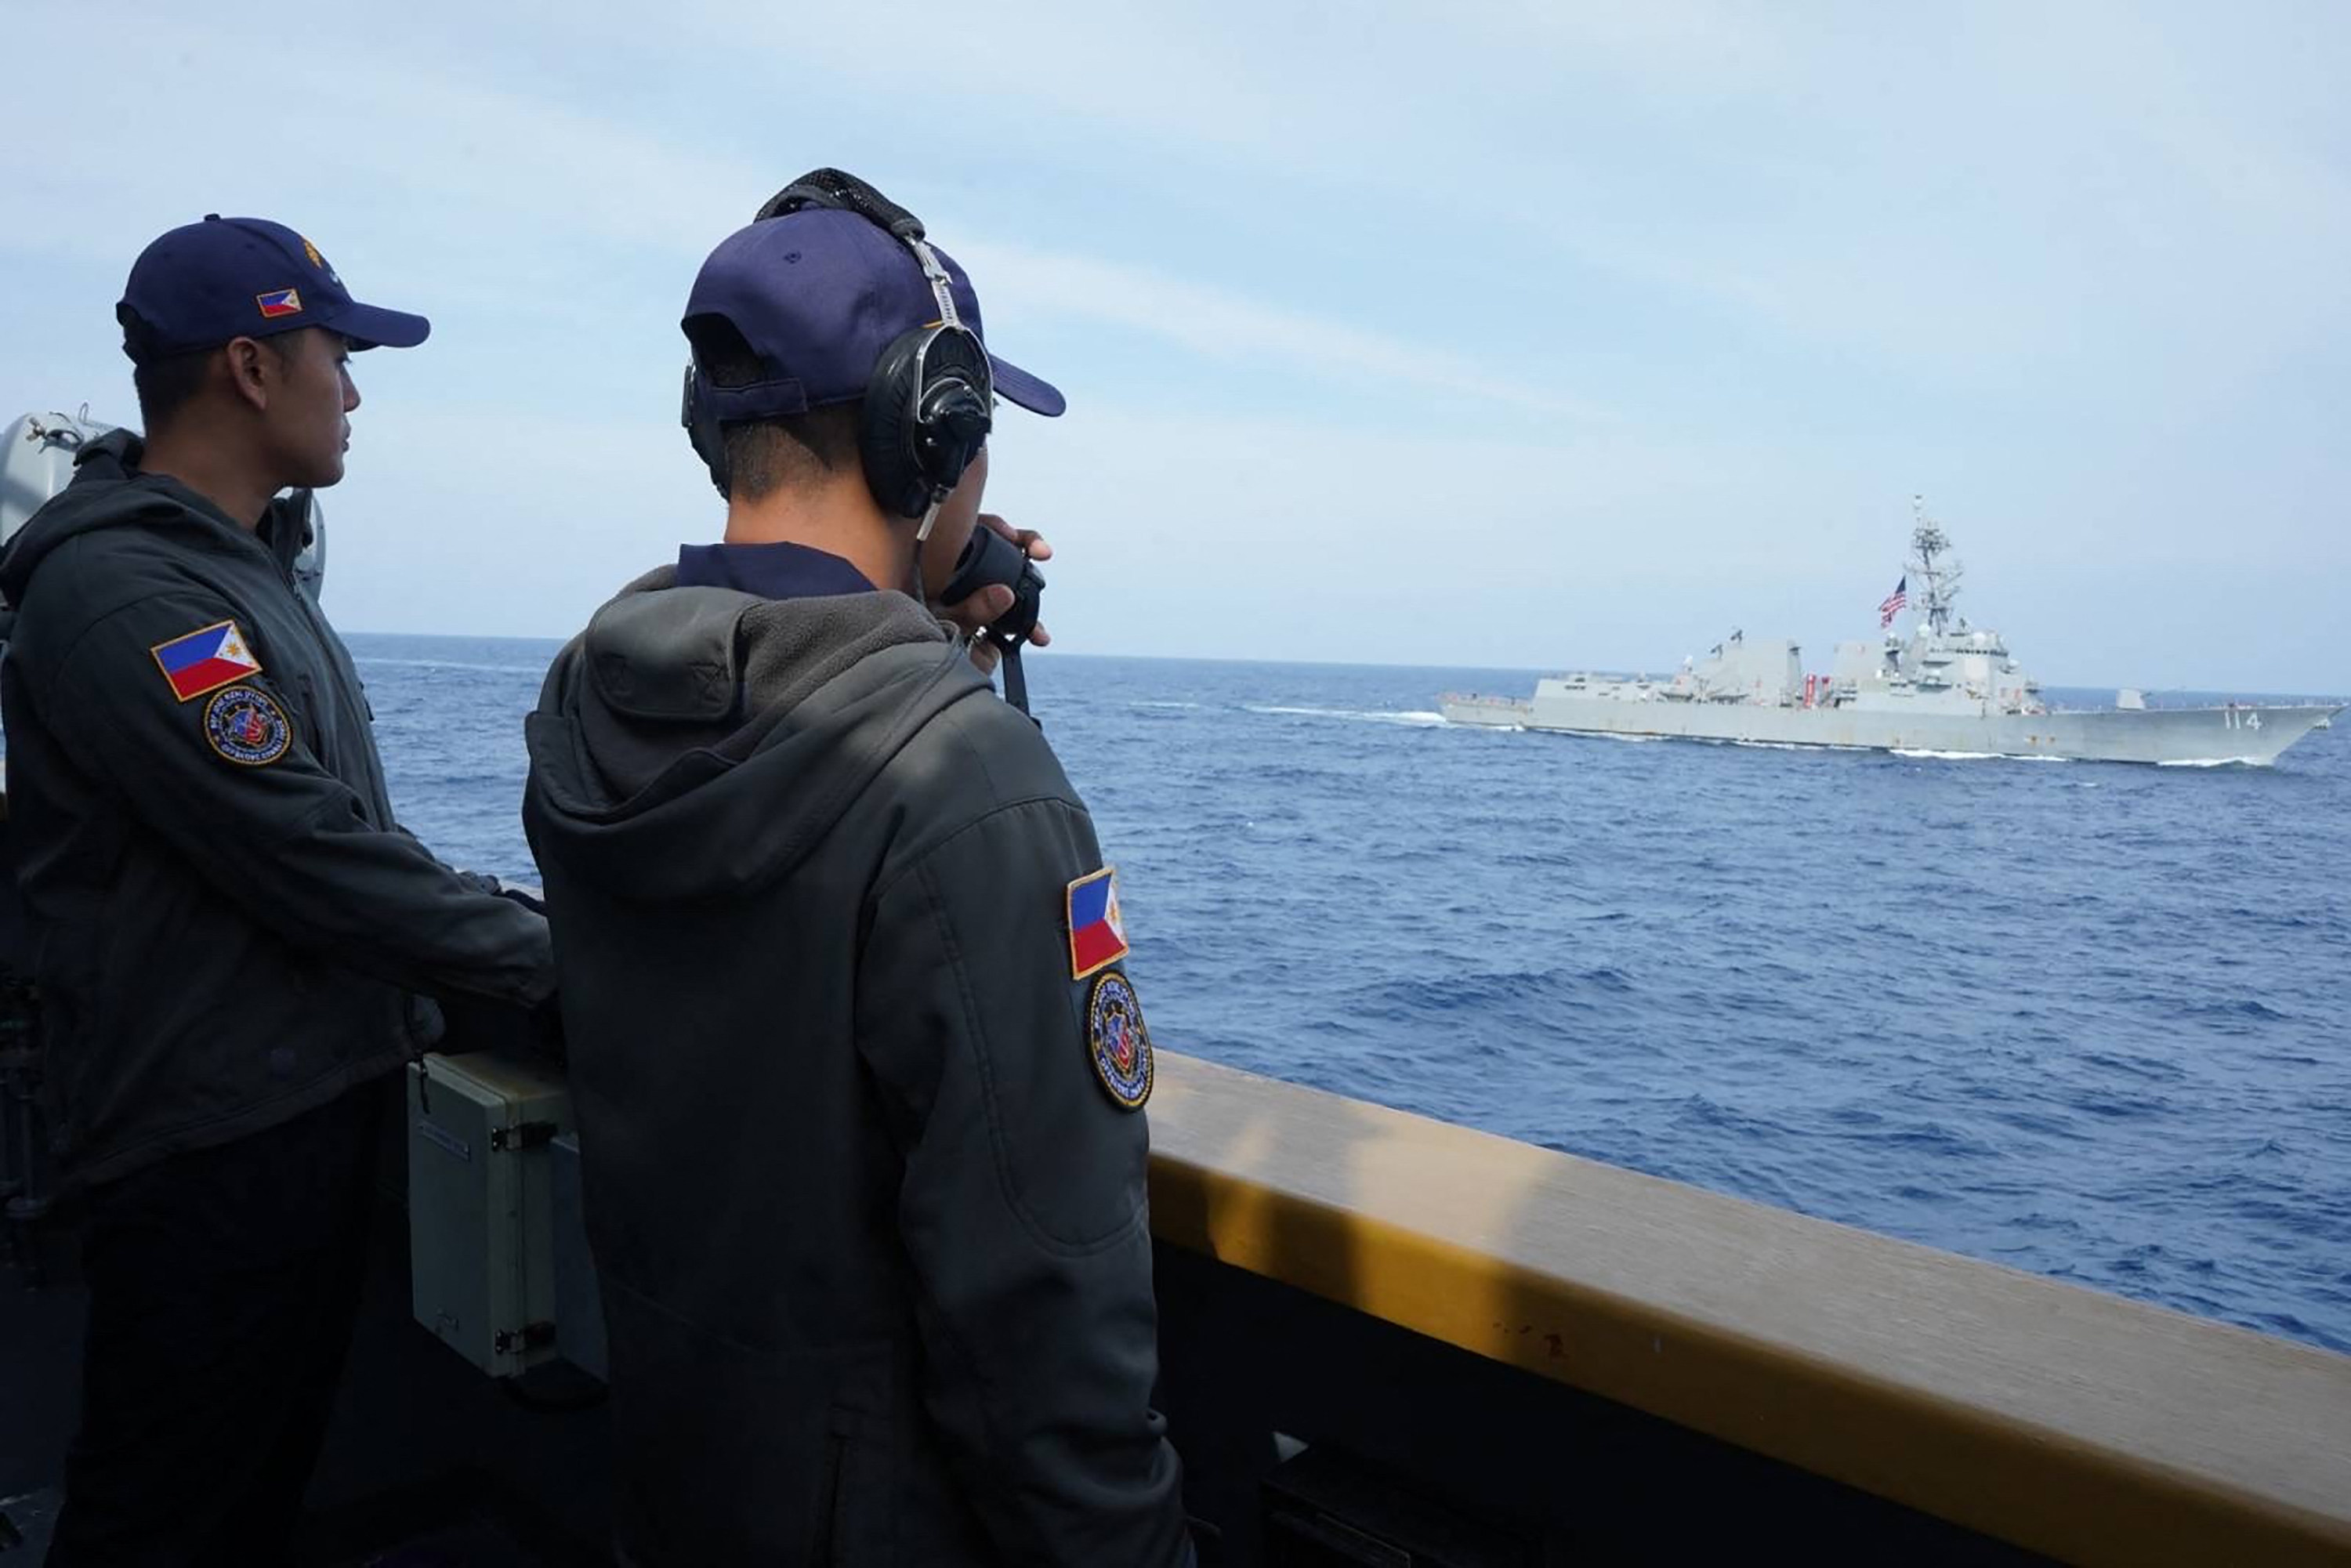 Philippine sailors aboard the frigate BRP Jose Rizal look on as the USS Ralph Johnson guided missile destroyer sails in the South China Sea on Monday. Photo: AFP/Armed Forces of the Philippines